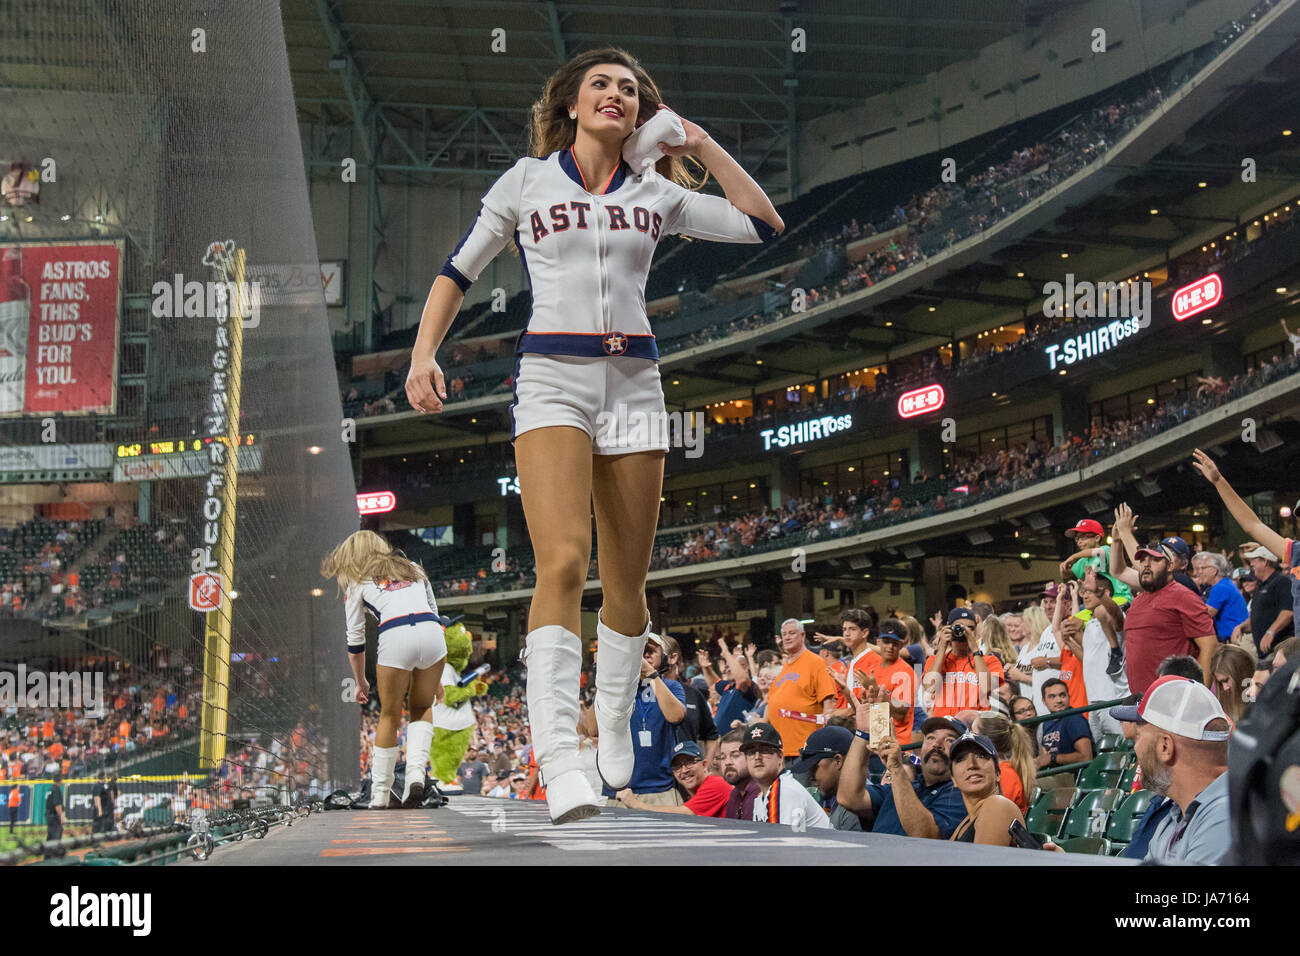 August 23, 2017: A member of the Houston Astros Shooting Stars gives away  t-shirts during a Major League Baseball game between the Houston Astros and  the Washington Nationals at Minute Maid Park